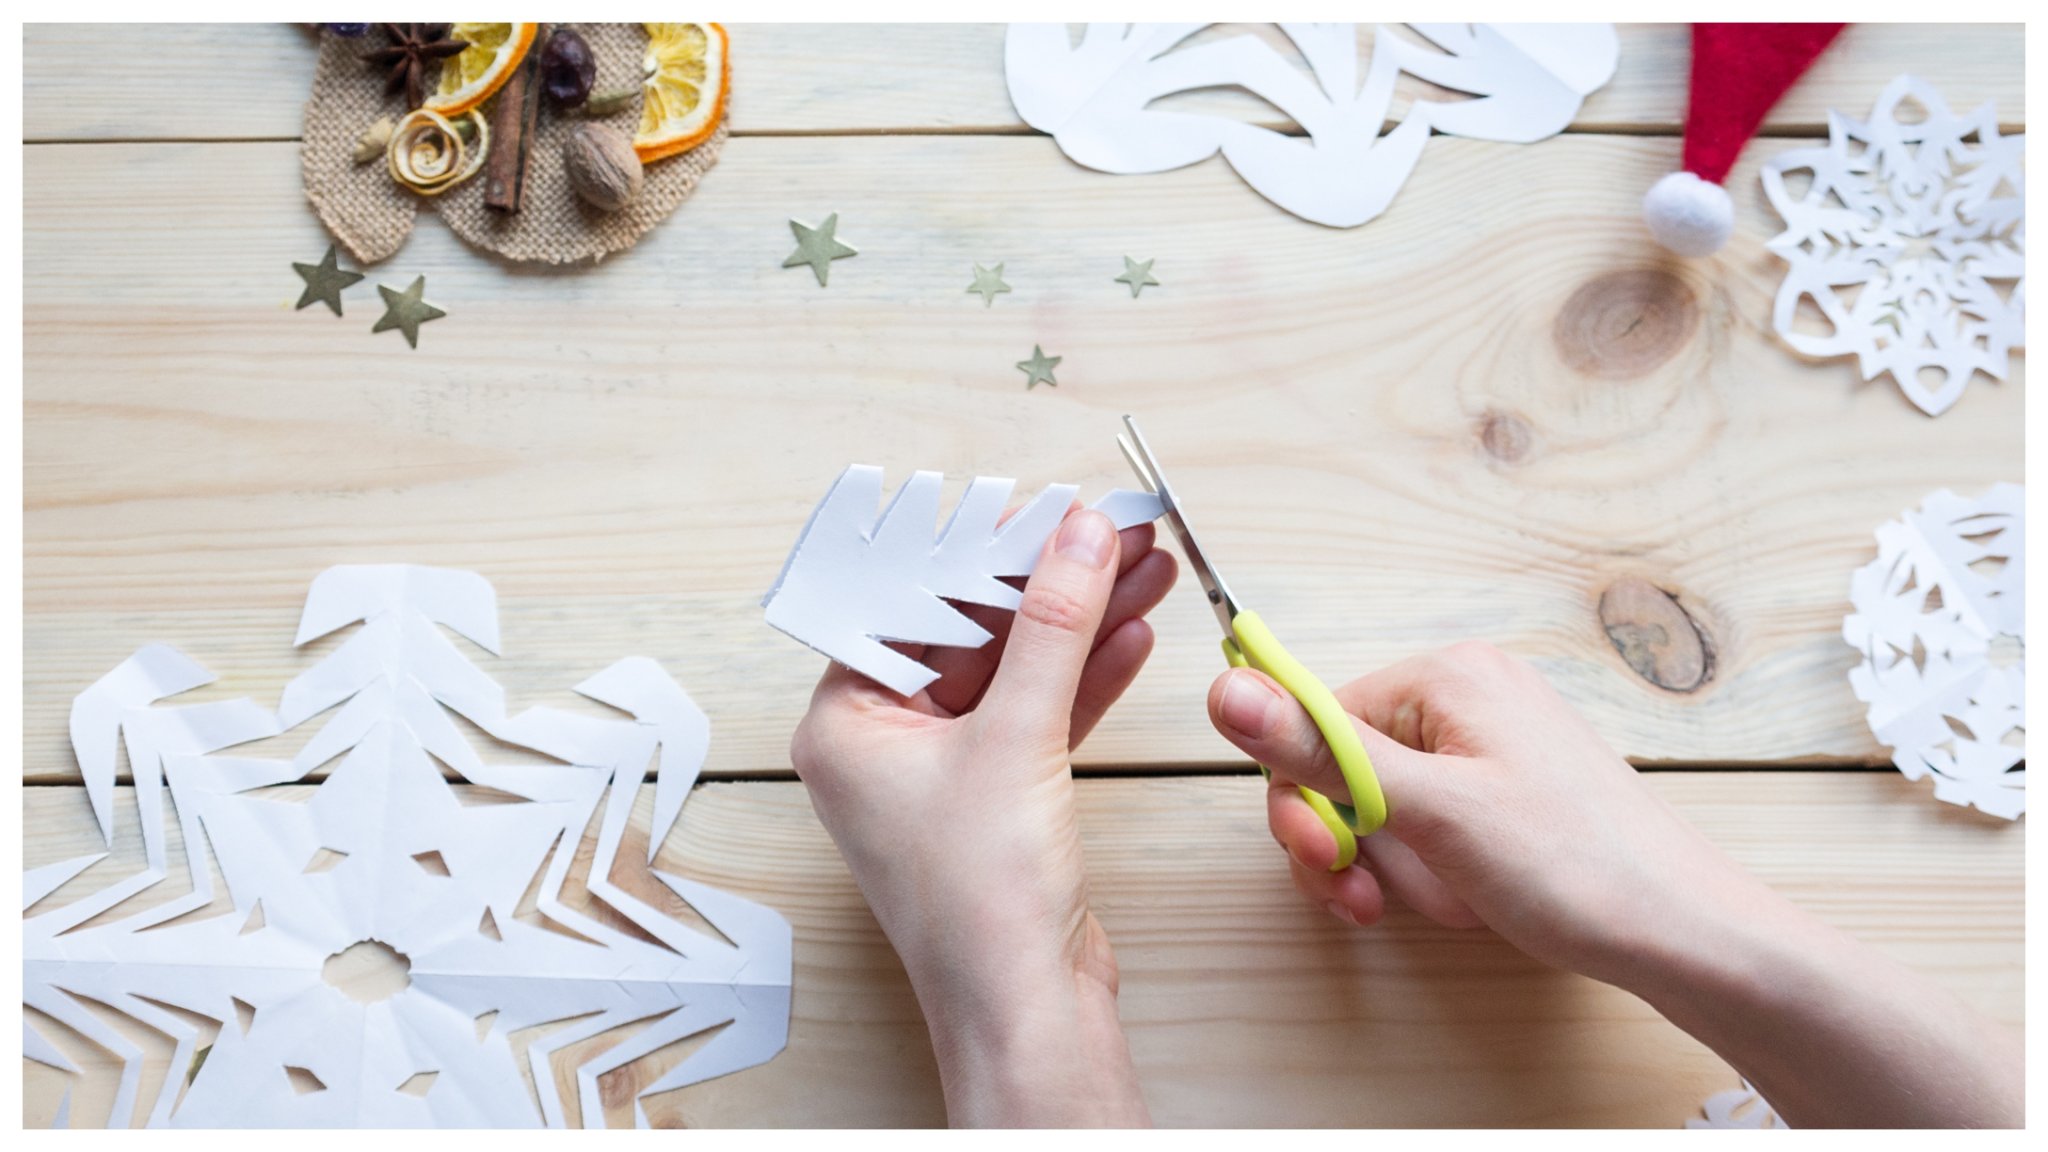 7 Old-School Christmas Crafts That Are Still So Much Fun To Make